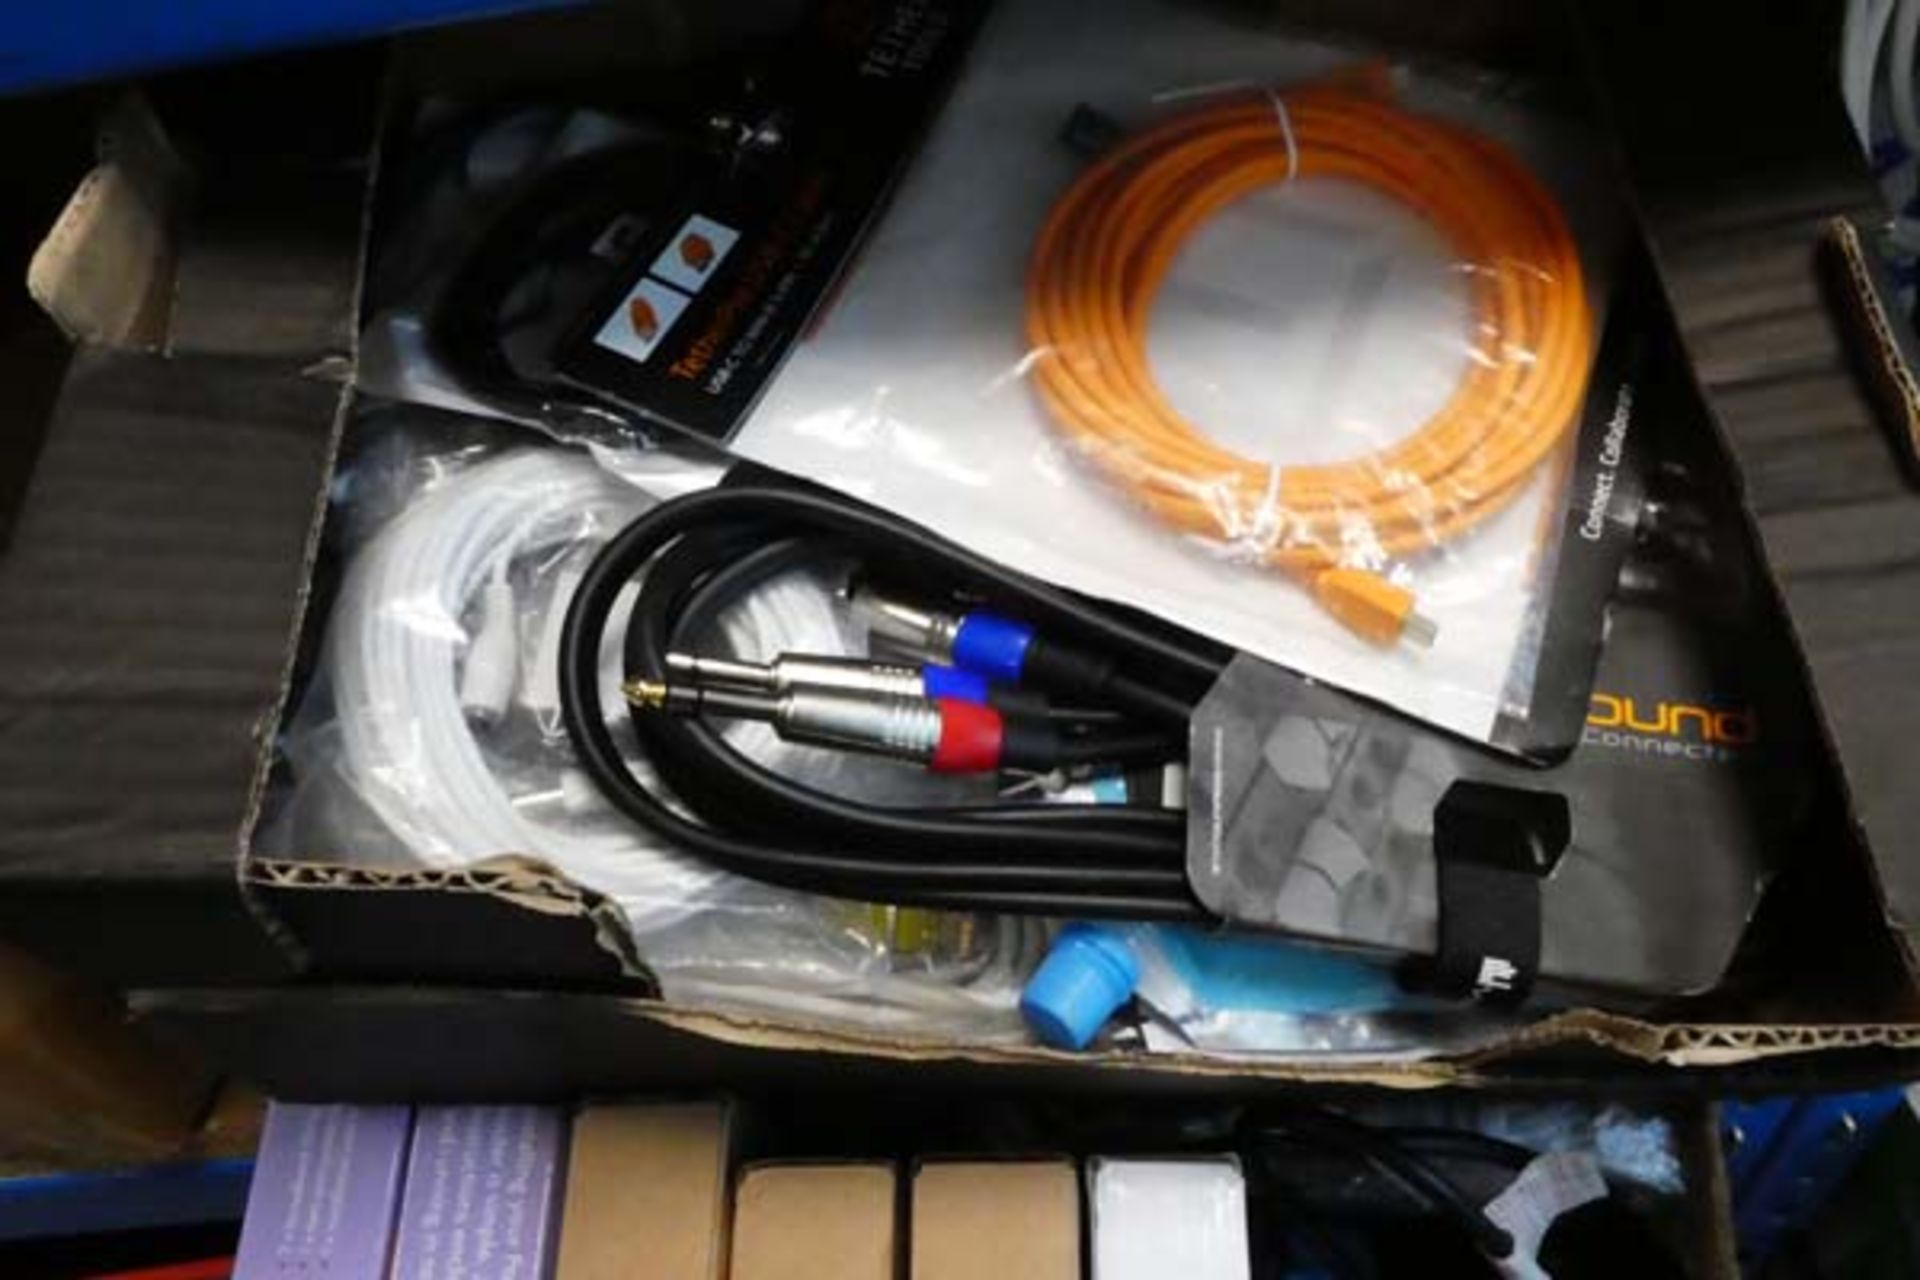 Network adaptor kits together with various electrical sundry cables, USB cable adaptors, audio - Image 2 of 3